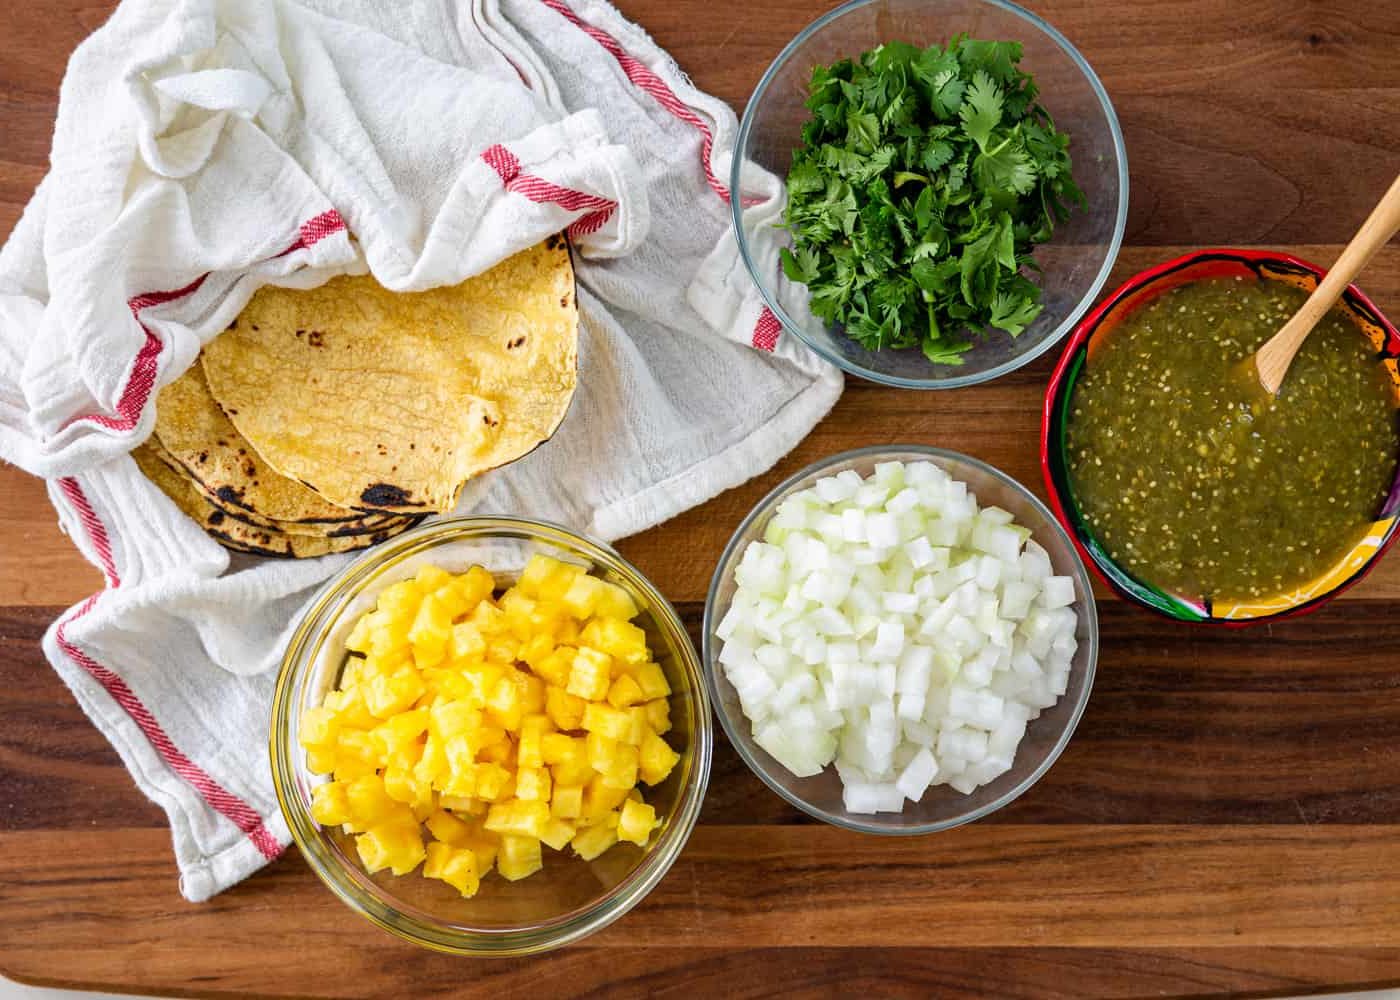 bowls of diced pineapple, diced onion, fresh cilantro, and green chili sauce next to corn tortillas wrapped in a white kitchen towel